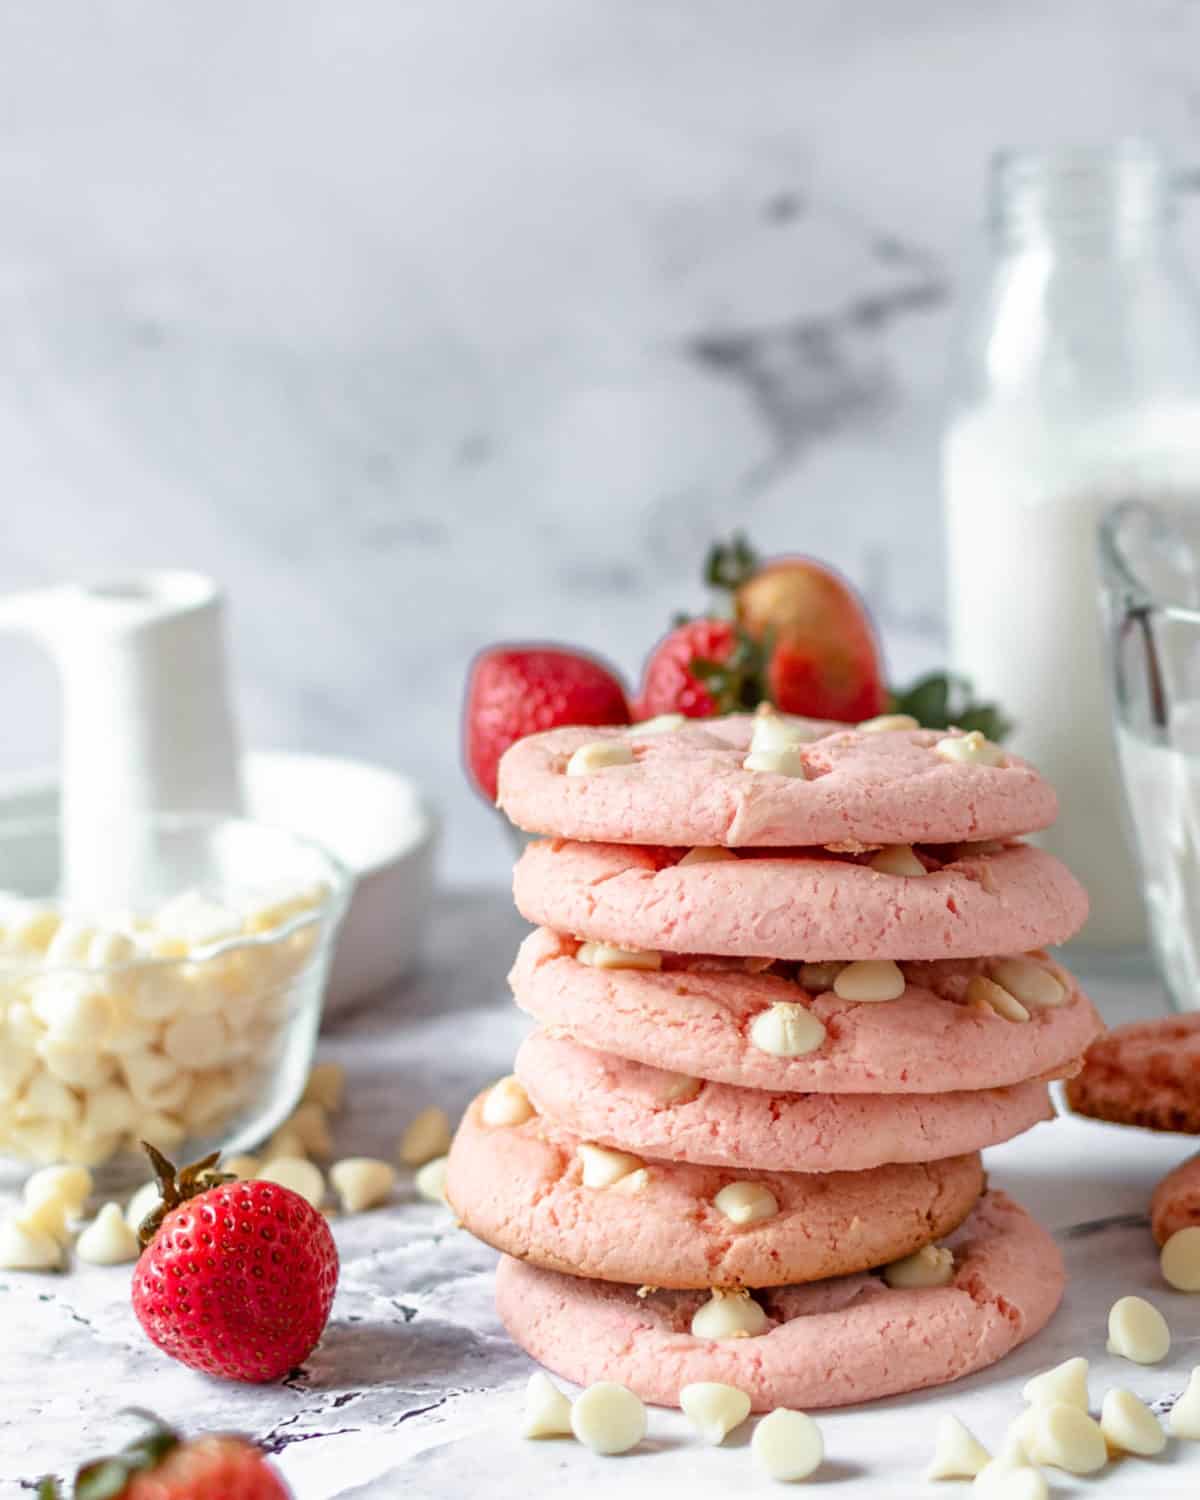 Six strawberry cookies stacked on top of each other.